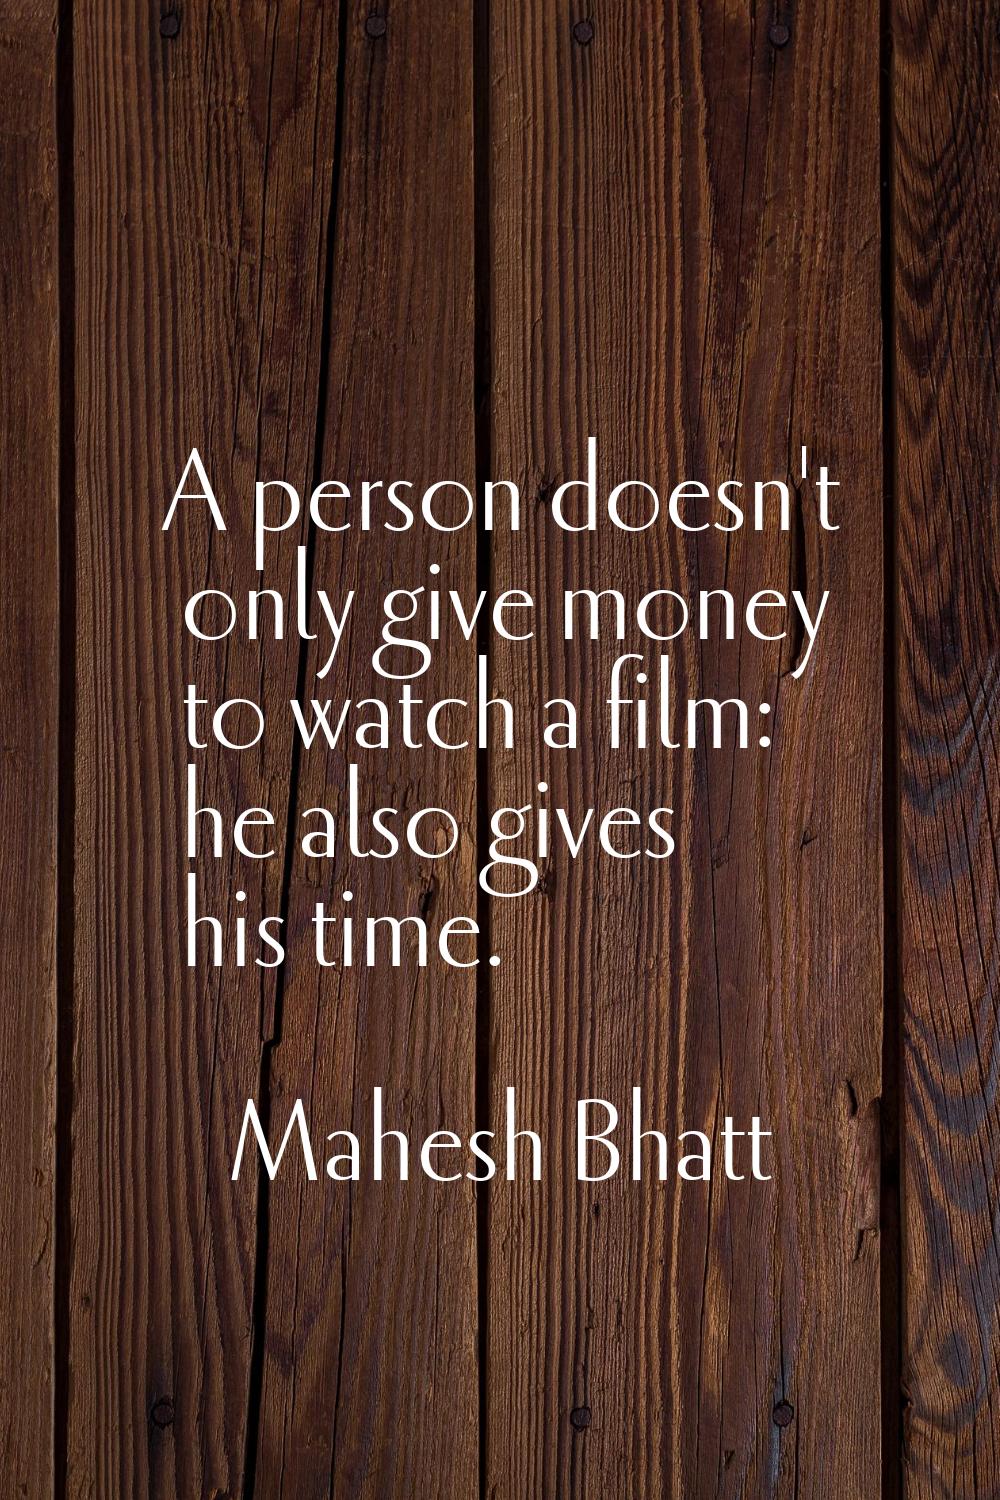 A person doesn't only give money to watch a film: he also gives his time.